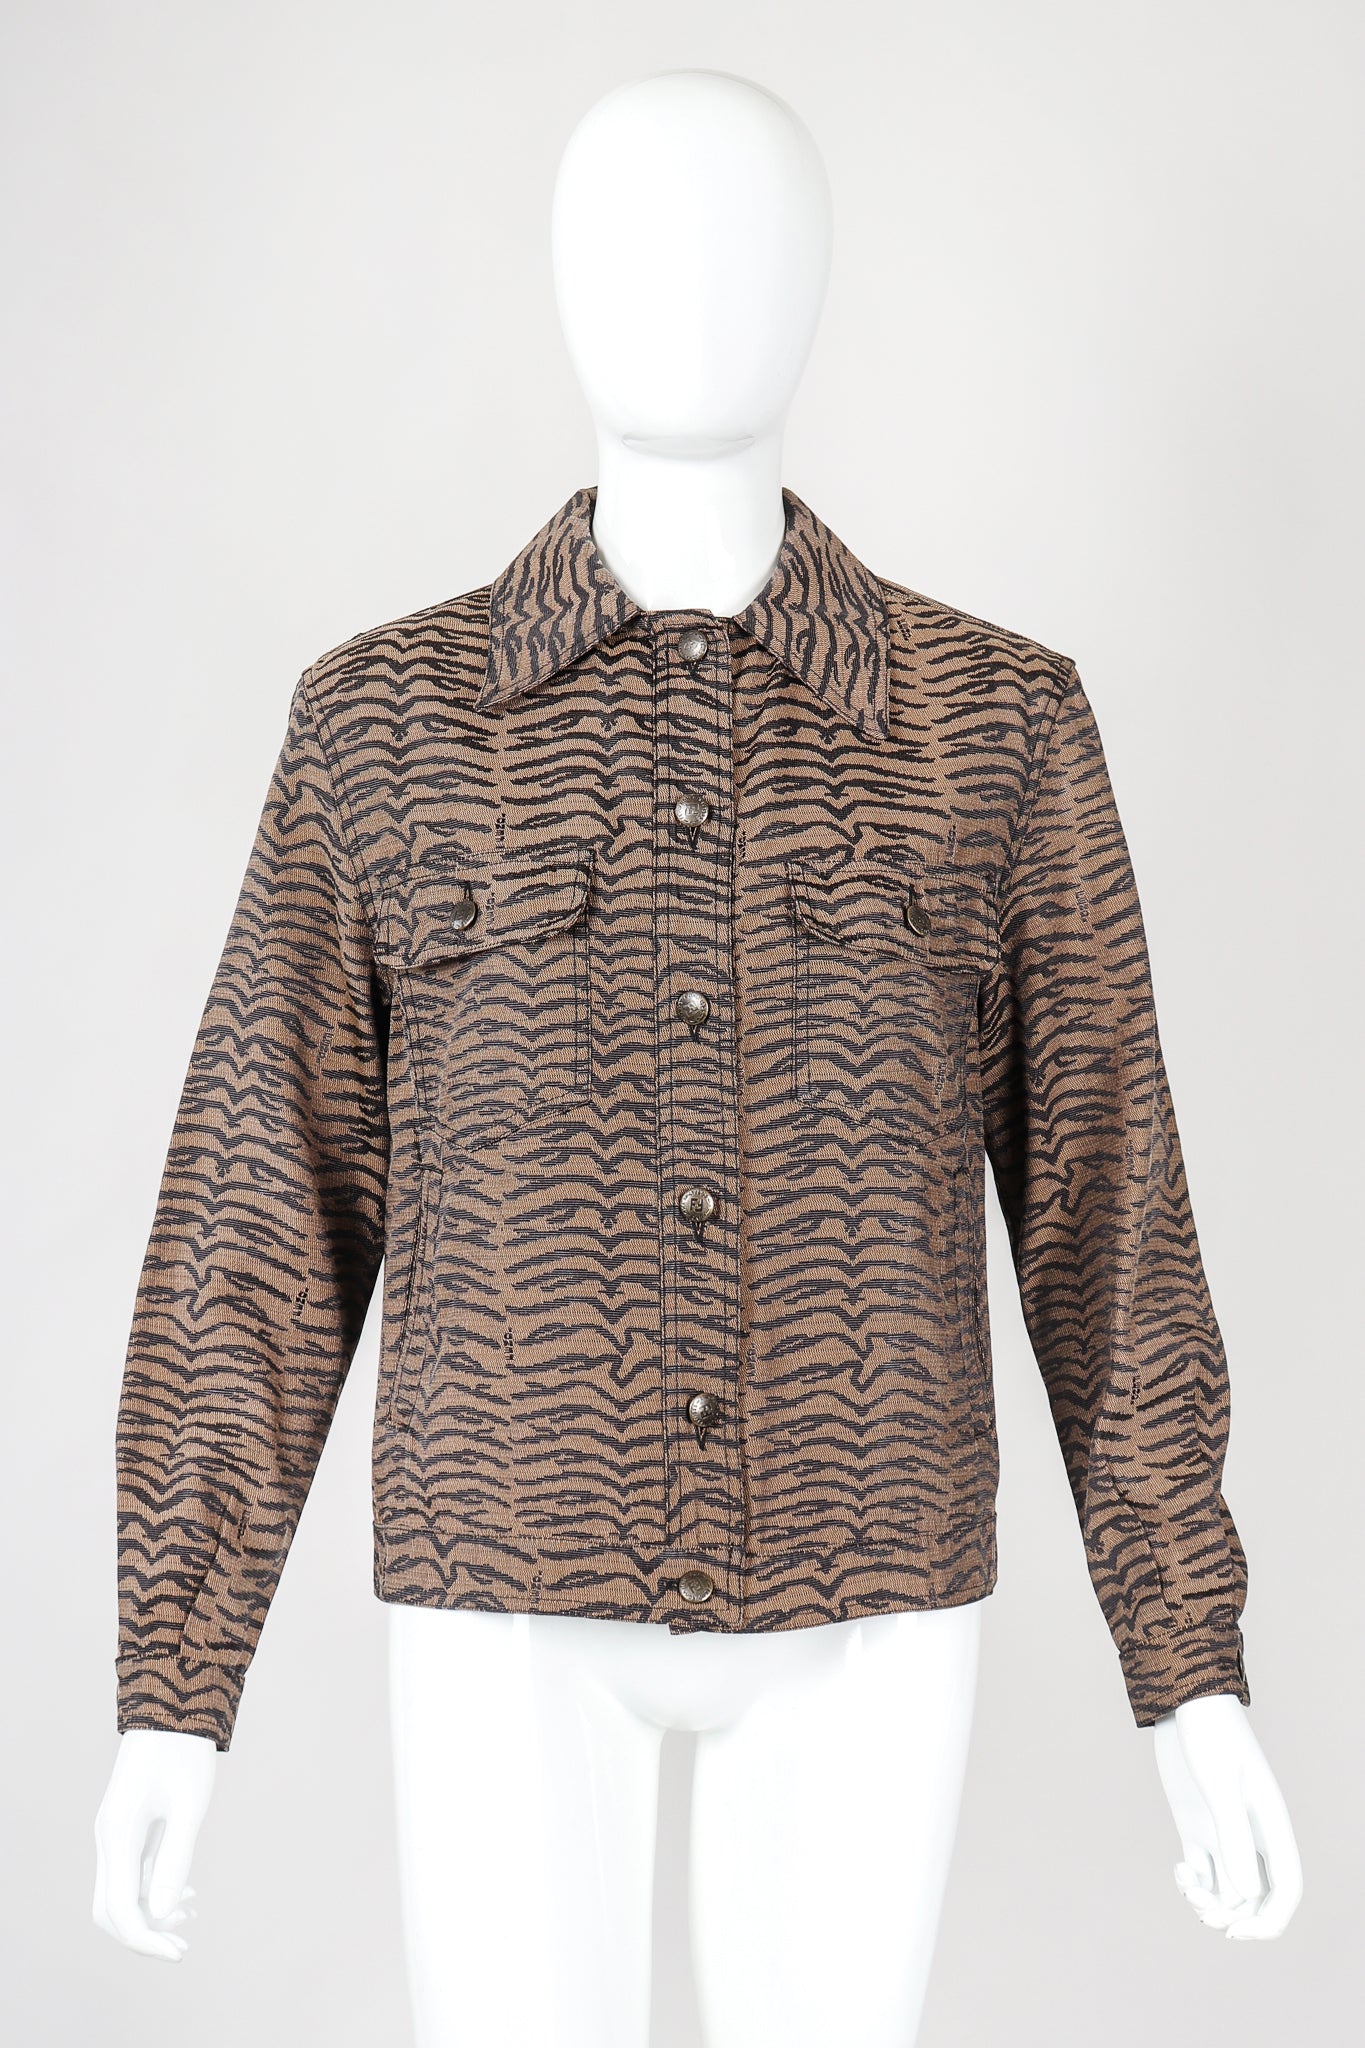 Recess Vintage Fendi Brown Tiger Twill Jean Jacket, buttoned on Mannequin